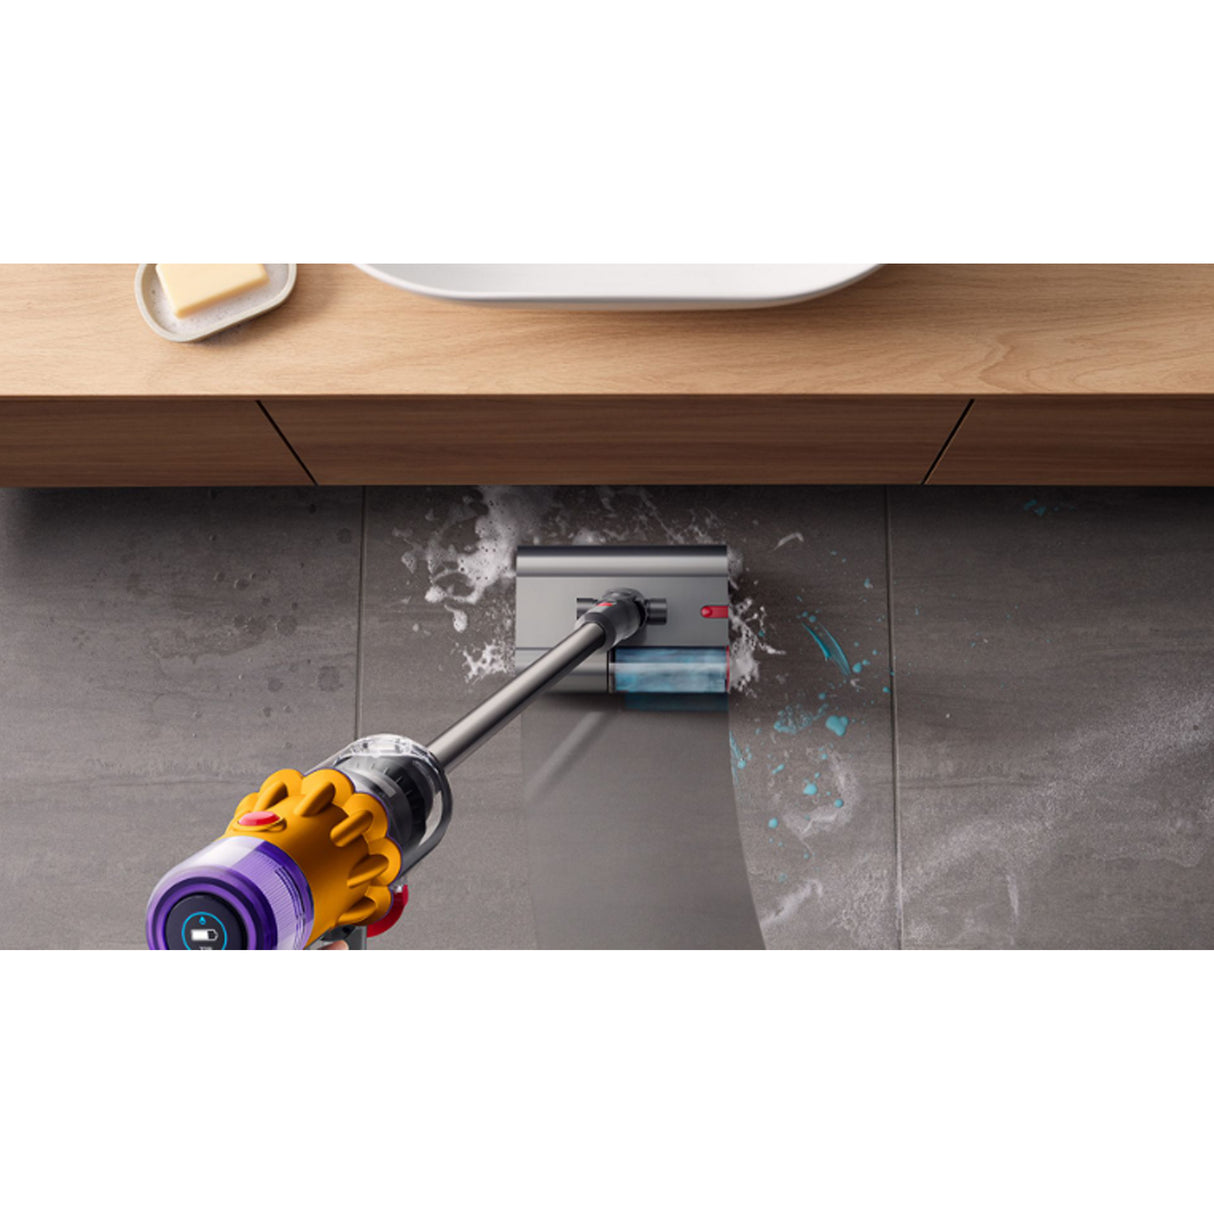 Dyson V12s Detect Slim Submarine Wet & Dry Absolute Cord-free Vacuum Cleaner